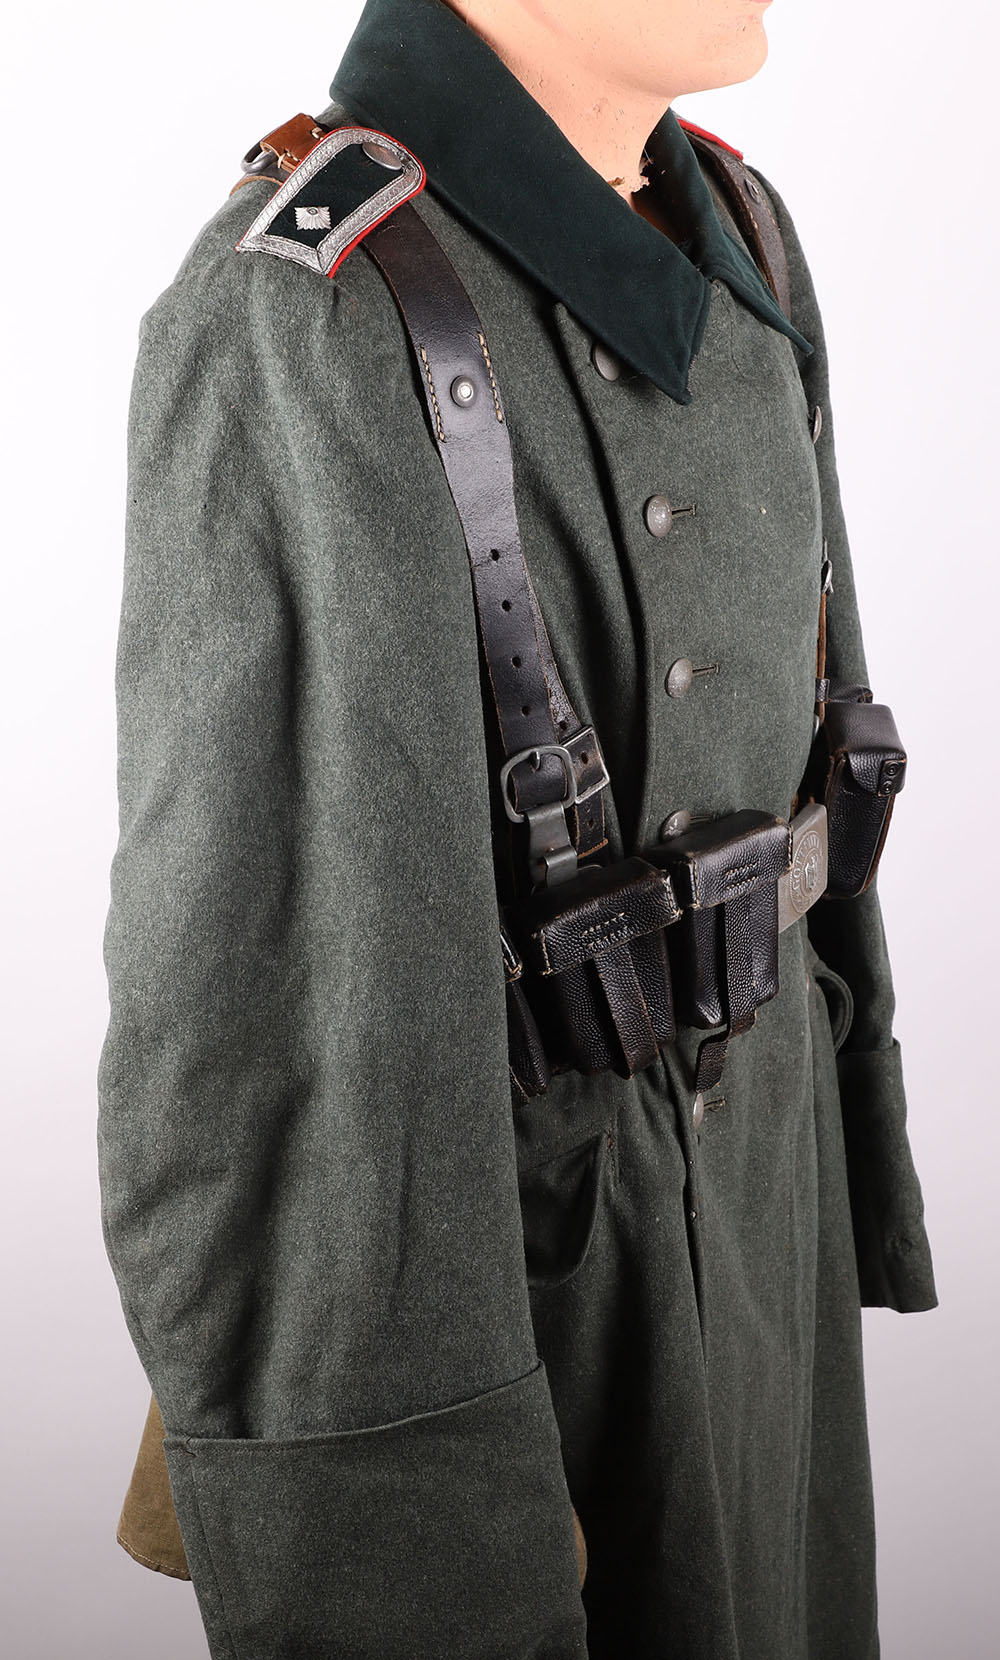 WW2 German Army Greatcoat, Overseas Cap and Equipment Set - Image 4 of 23